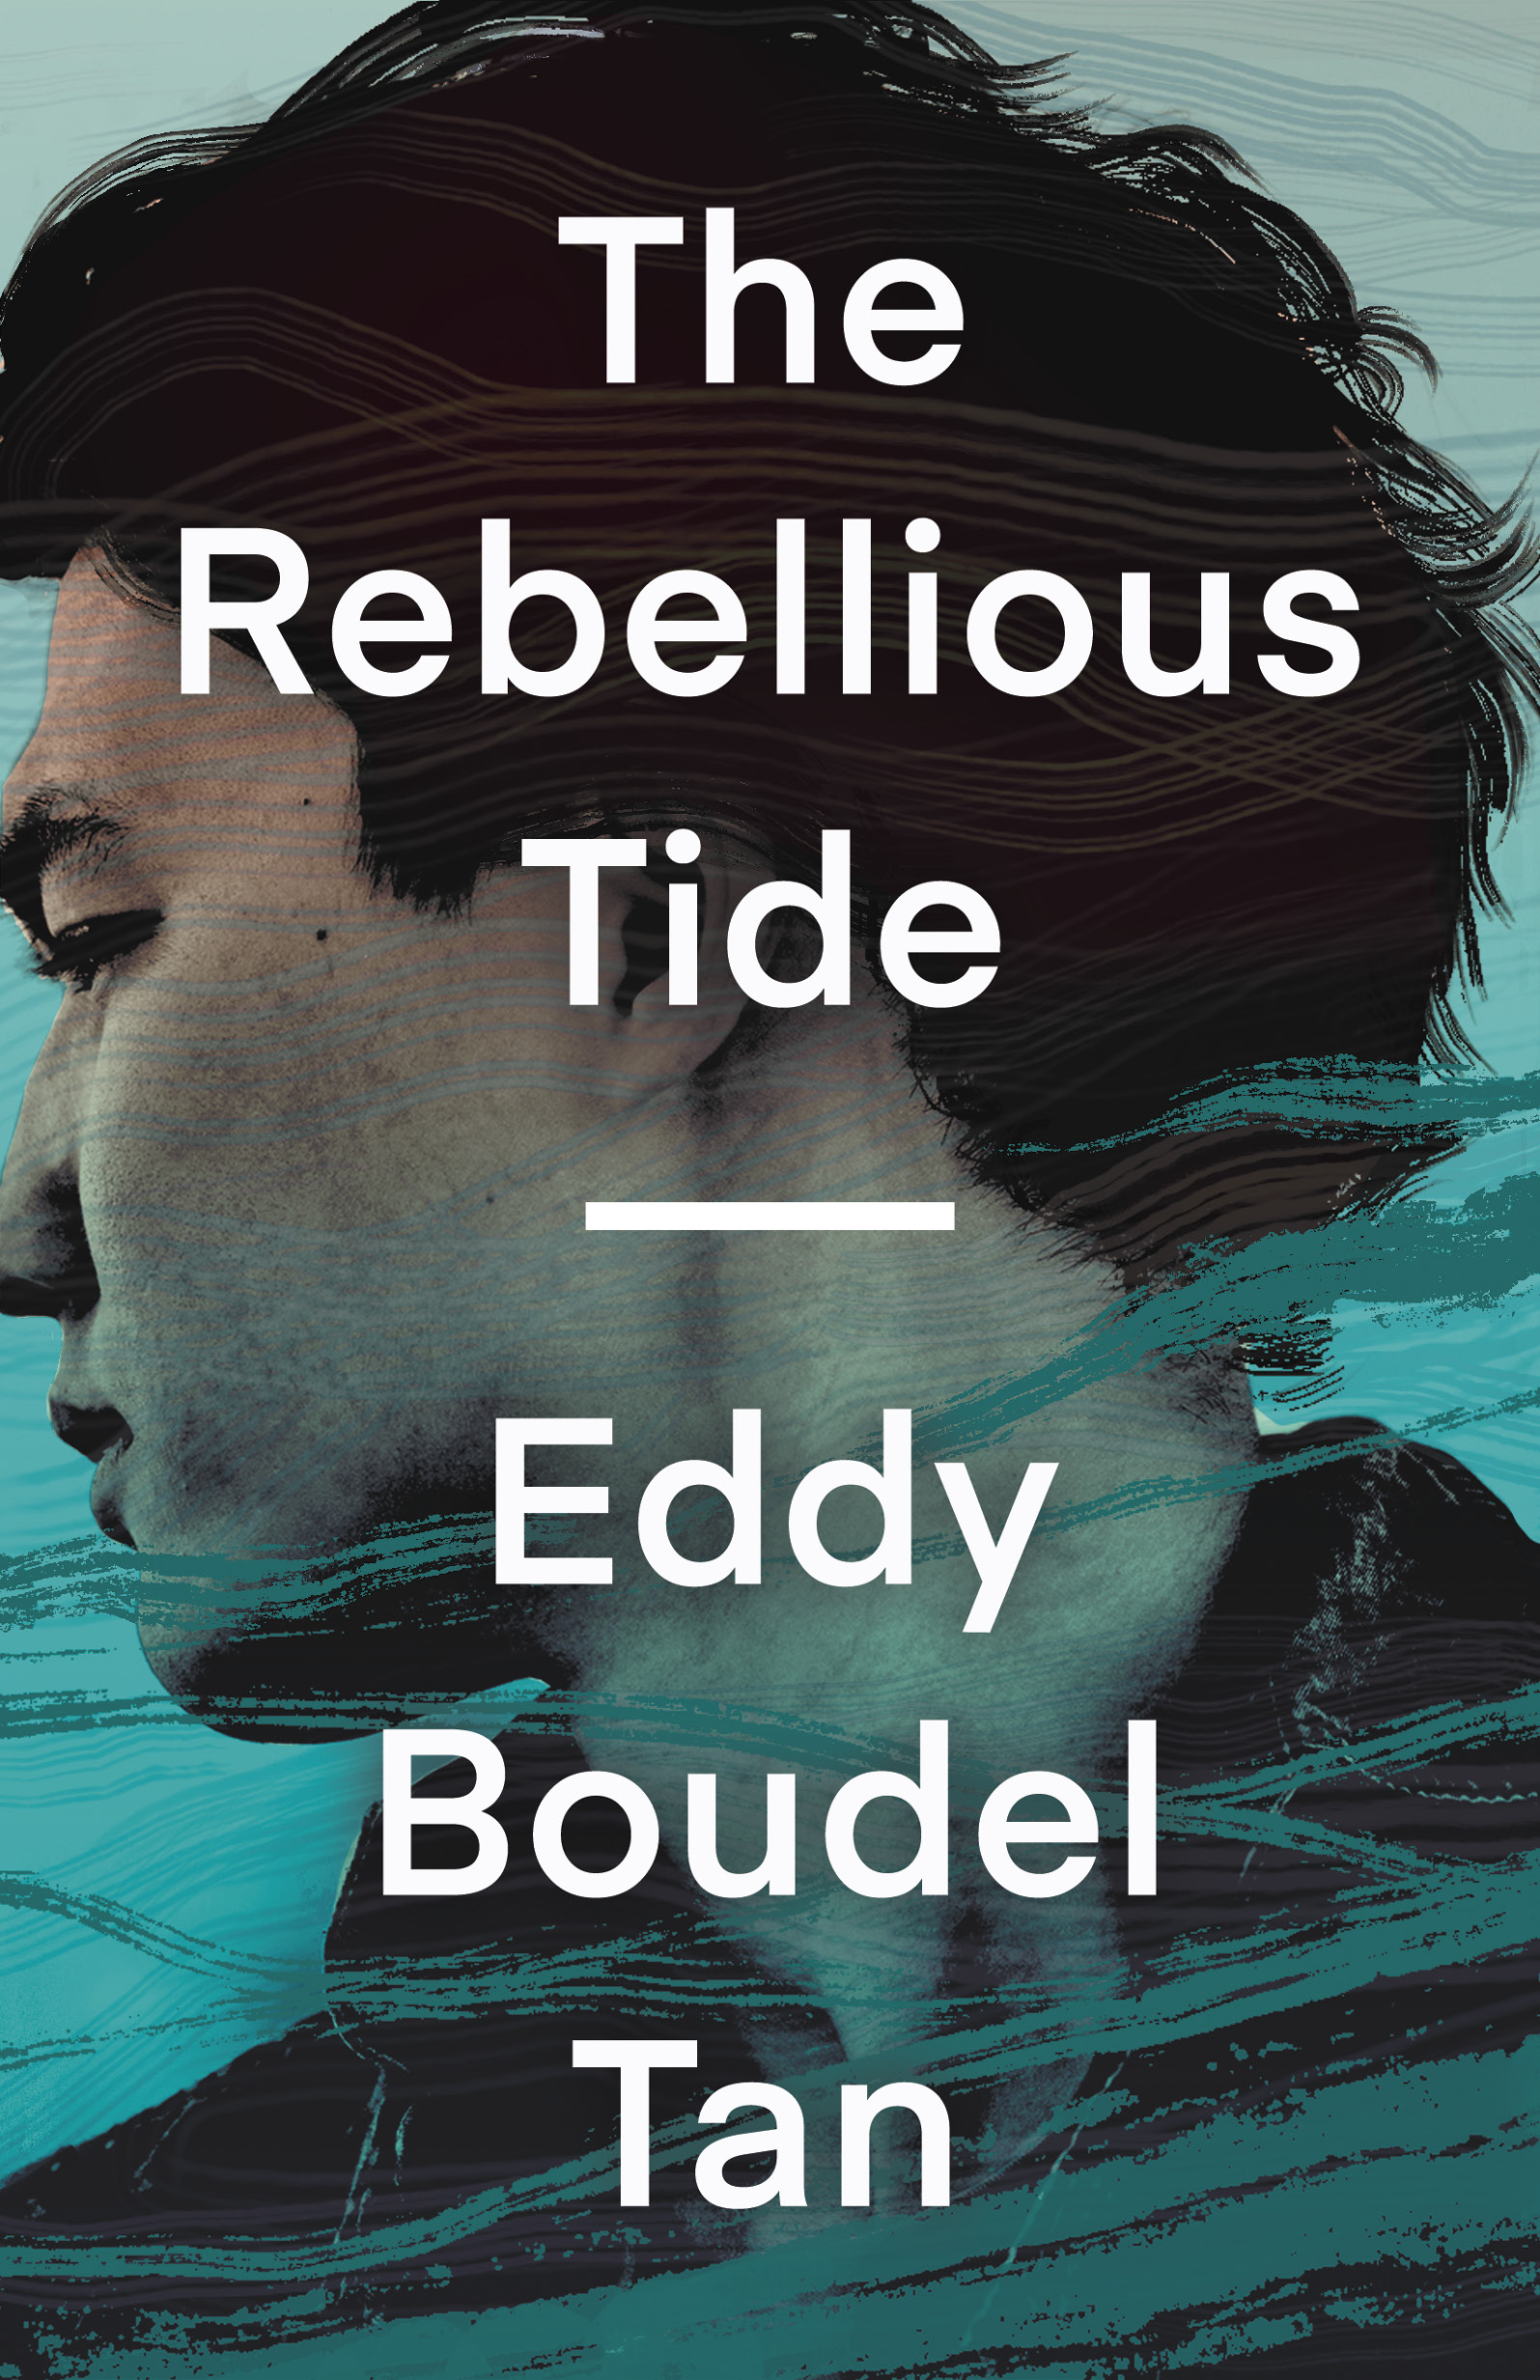 The cover of Rebellious Tide